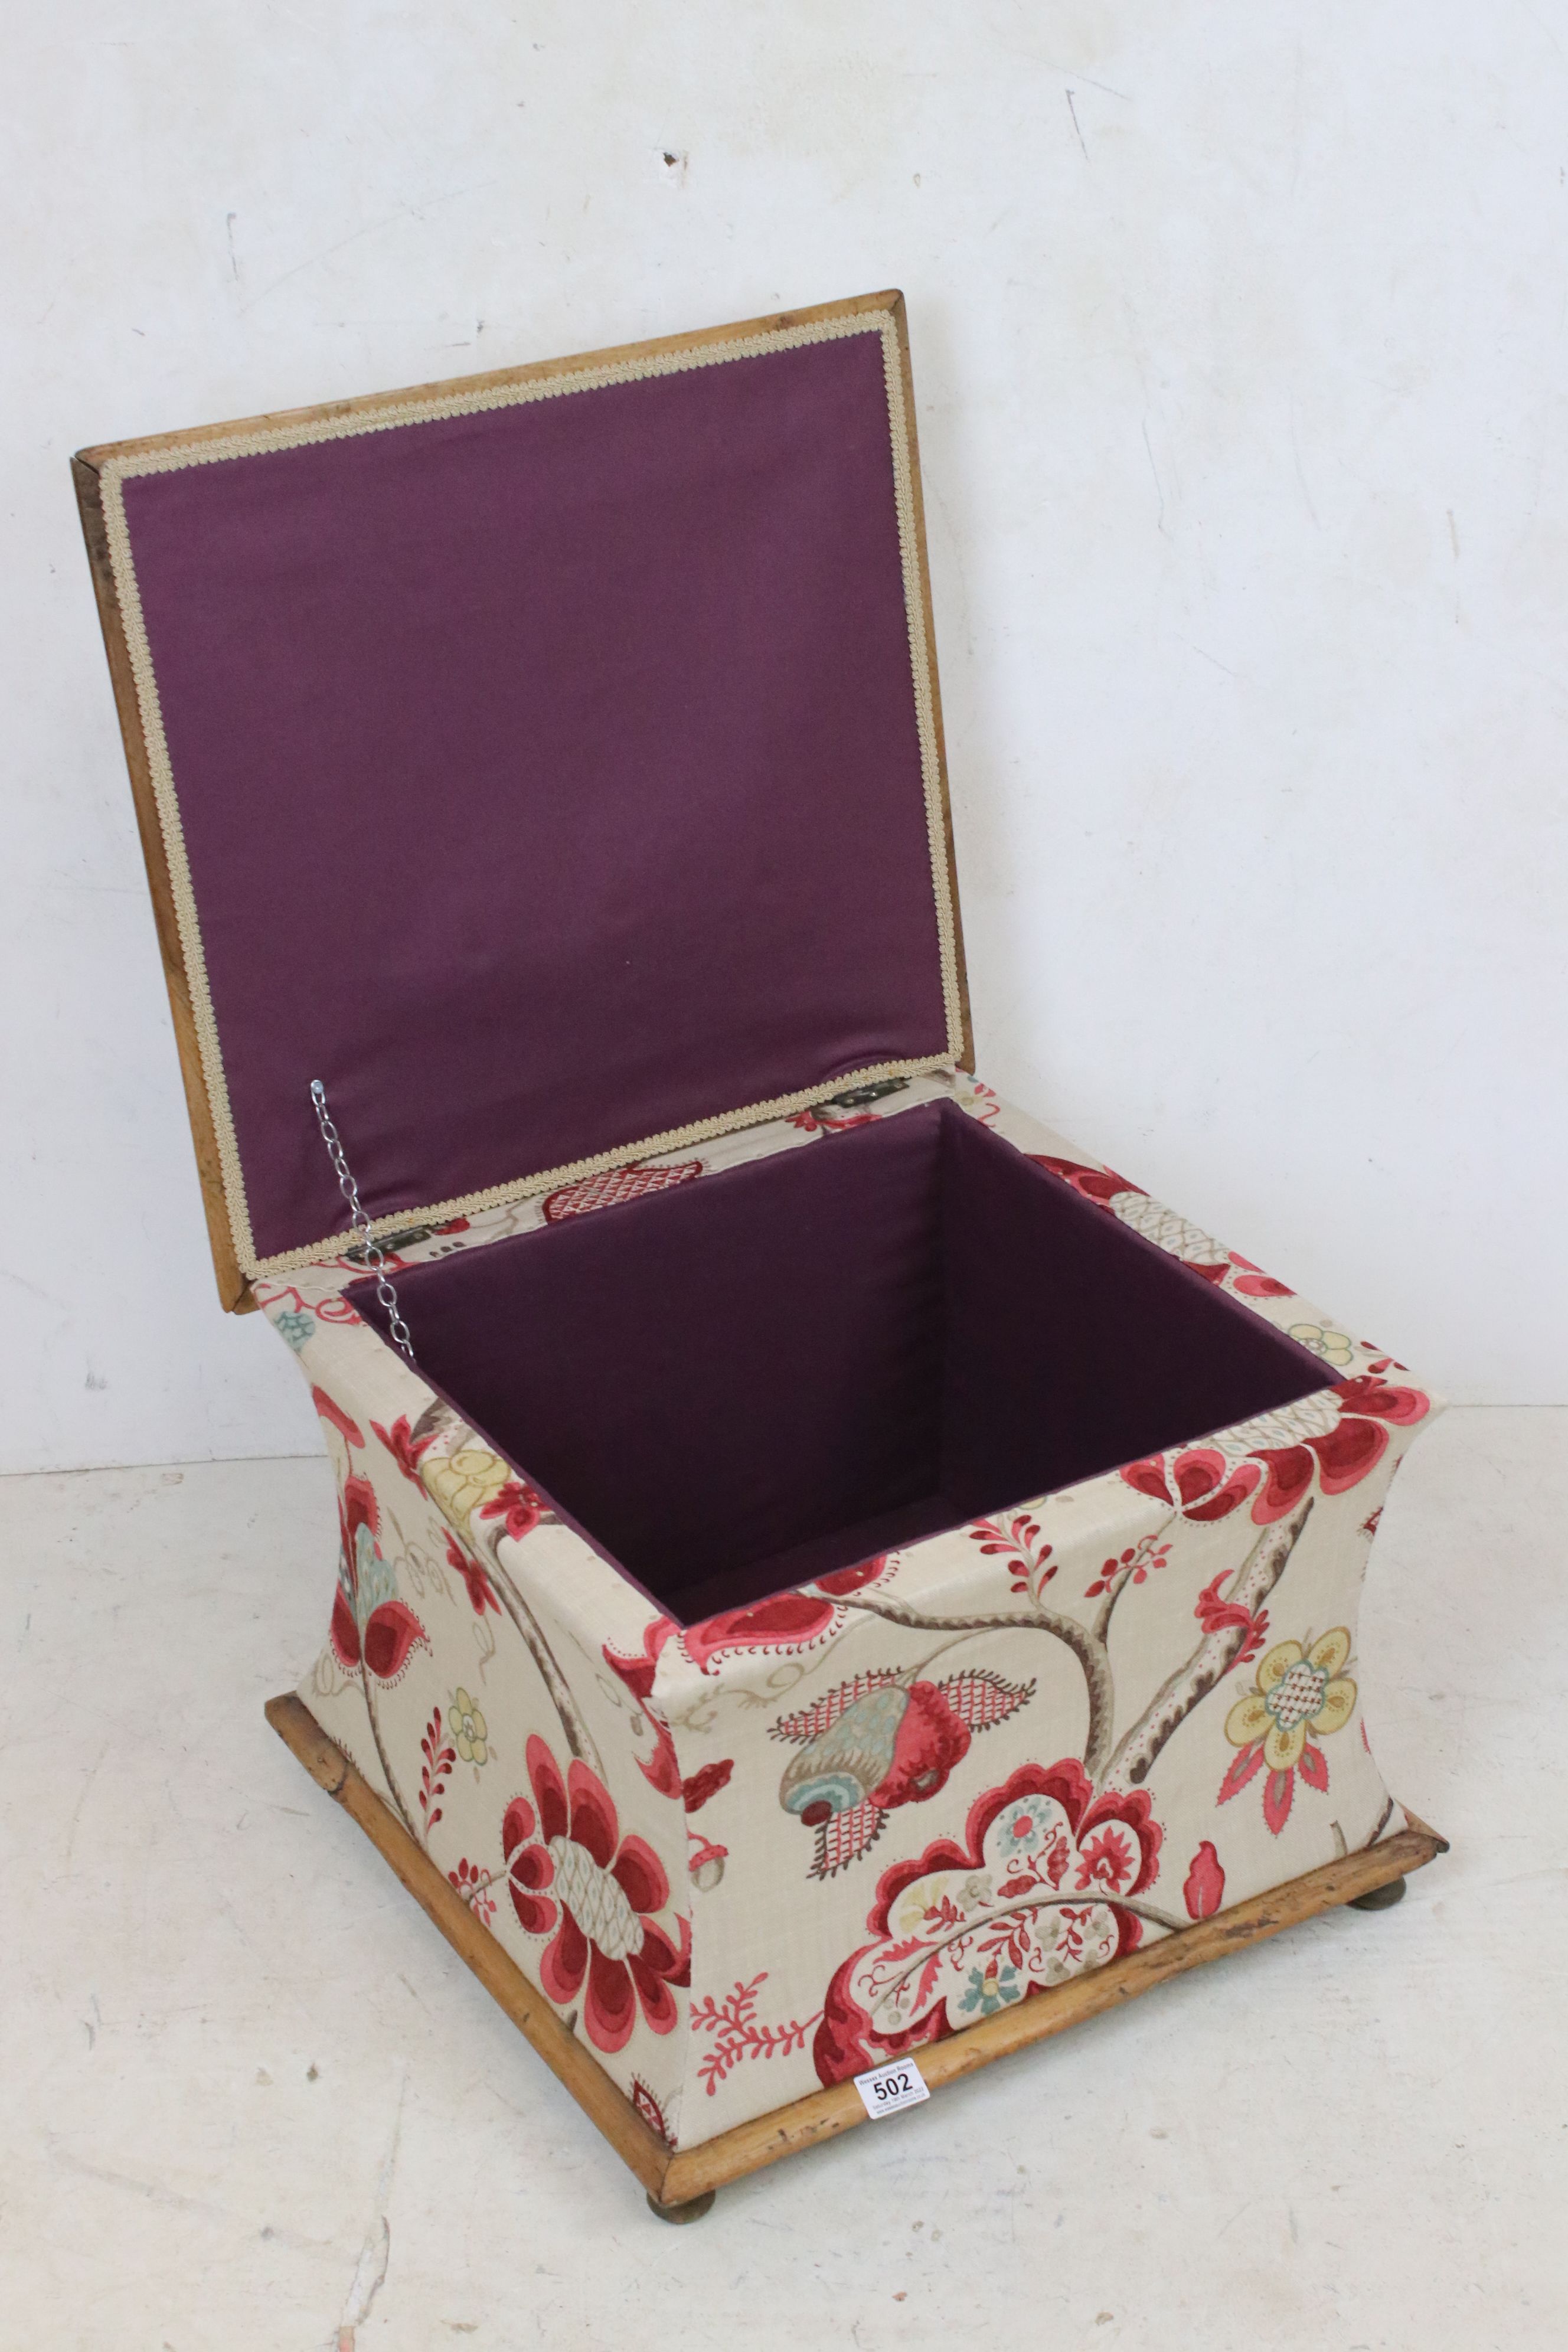 19th century Square Ottoman Box Stool, recently upholstered in Colefax & Fowler style fabric, 55cm - Image 3 of 4